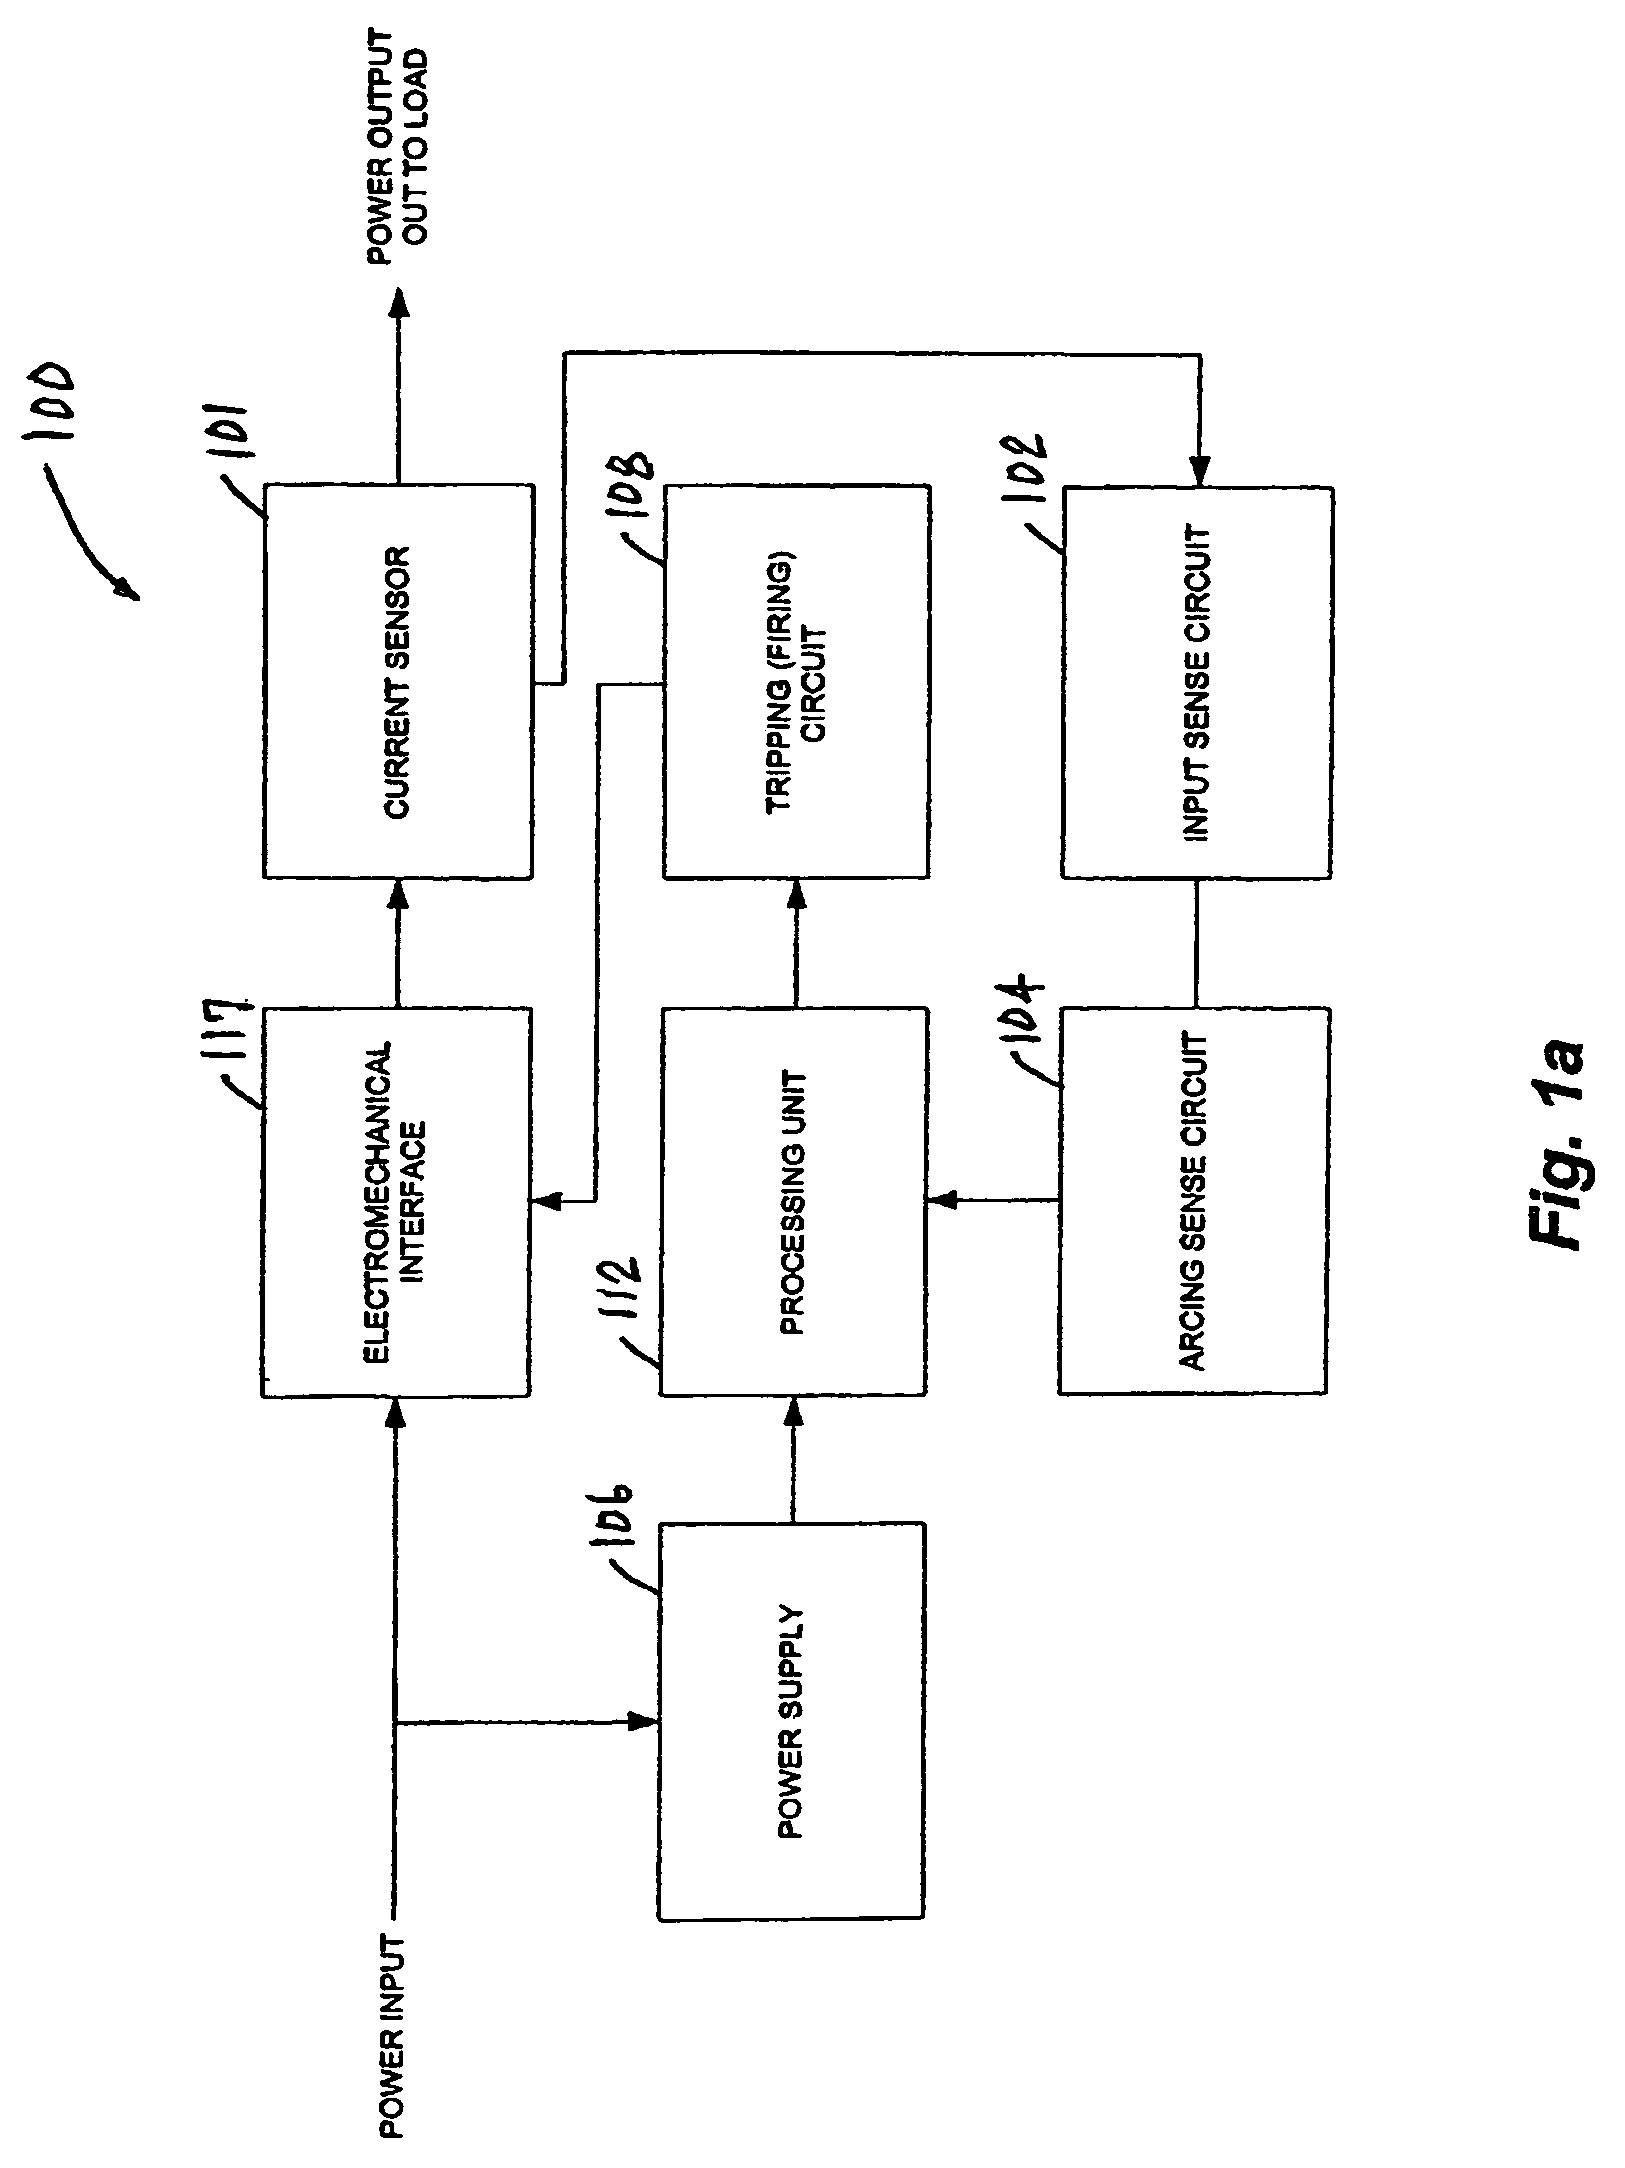 Methods of detecting arc faults characterized by consecutive periods of arcing